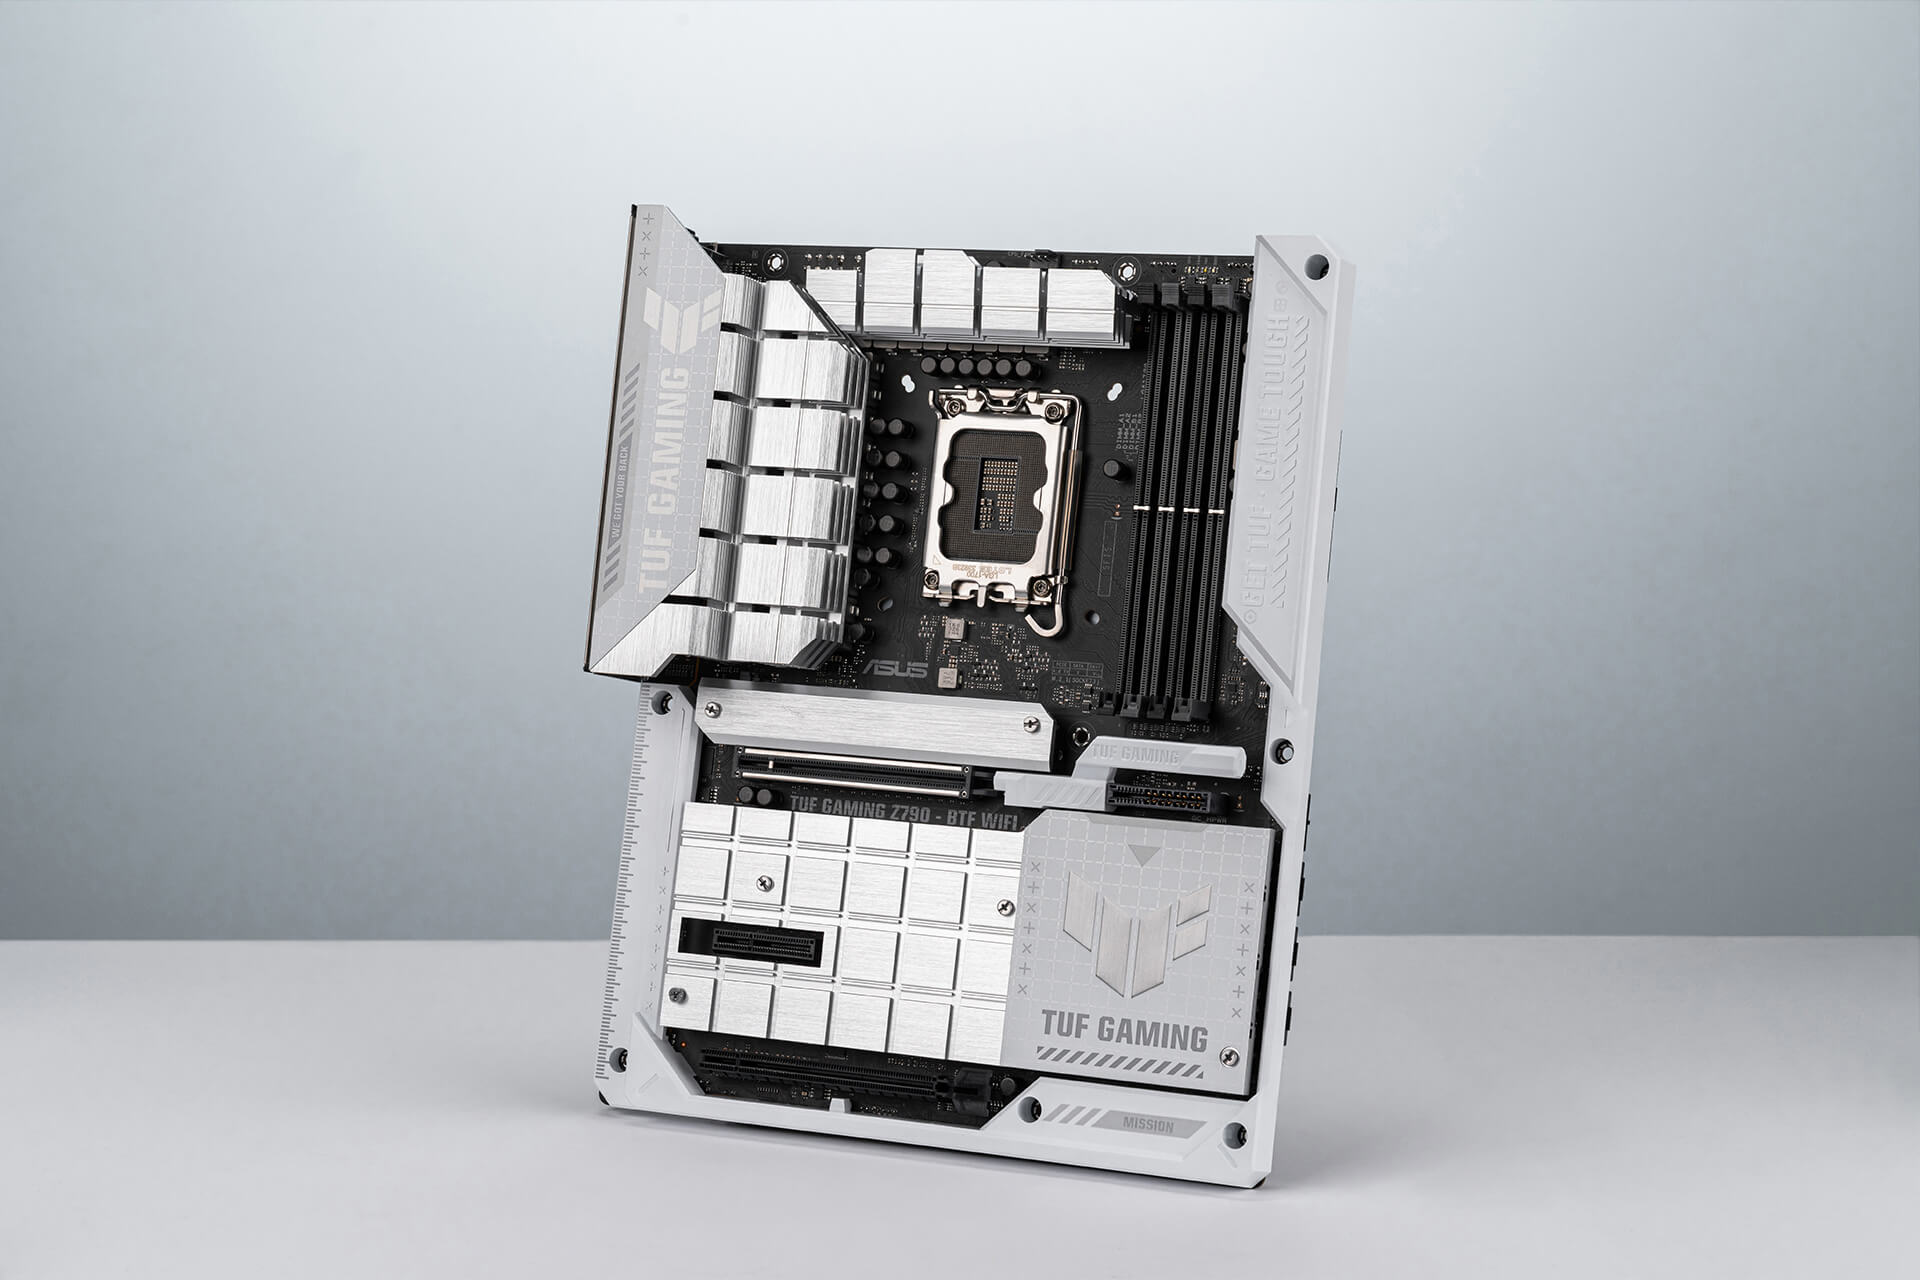 A 45˚ angle of TUF GAMING Z790-BTF WIFI motherboard stands in the middle with white background.